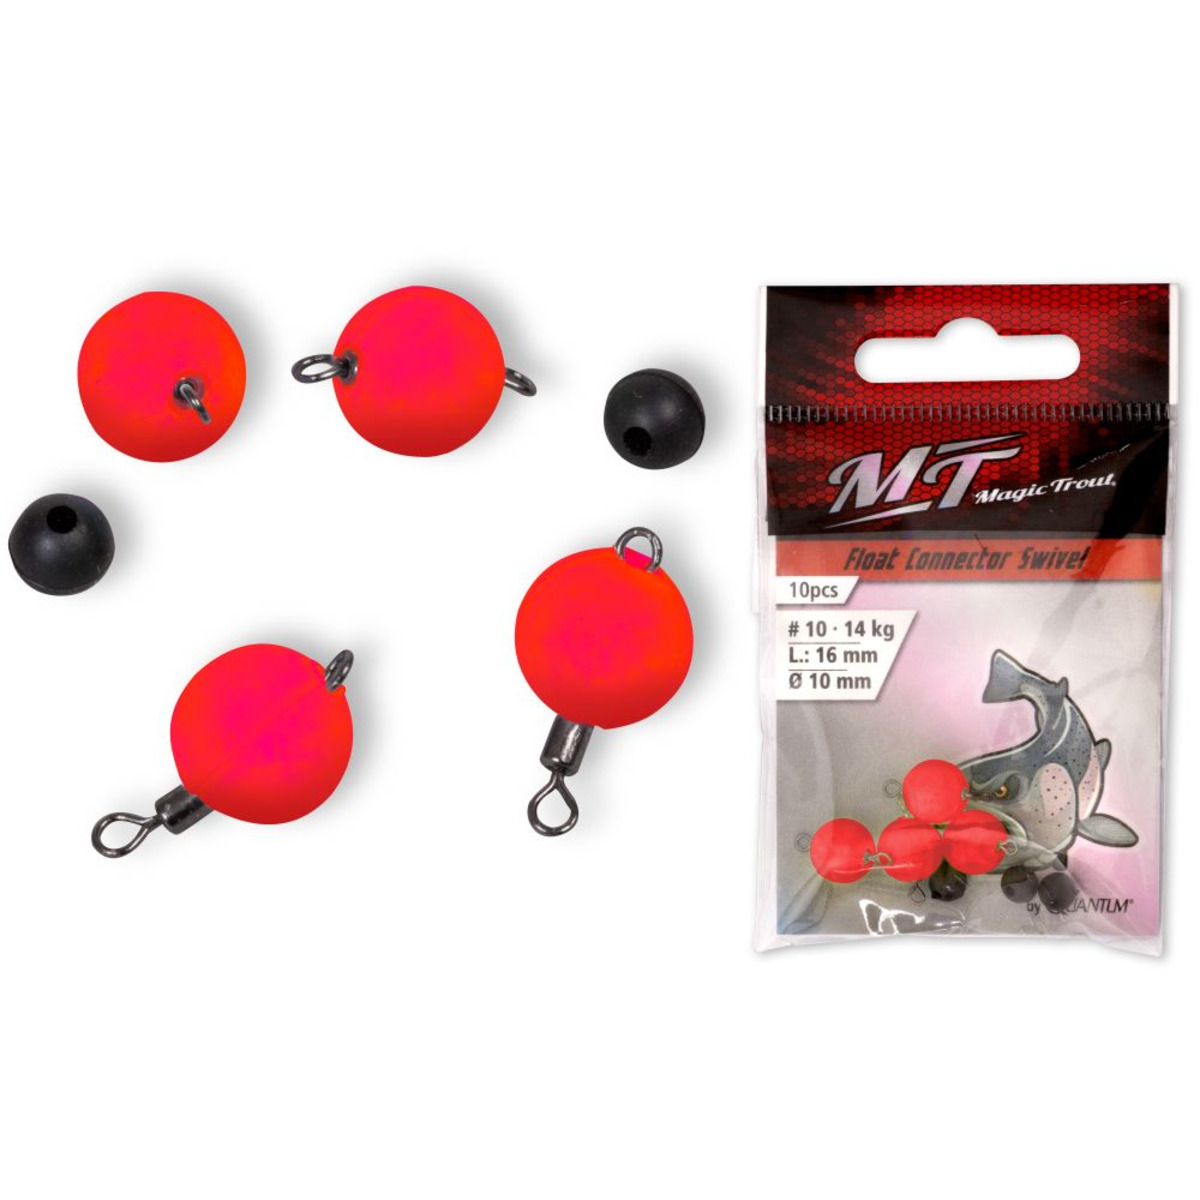 Magic Trout Float Connector Swivel - red